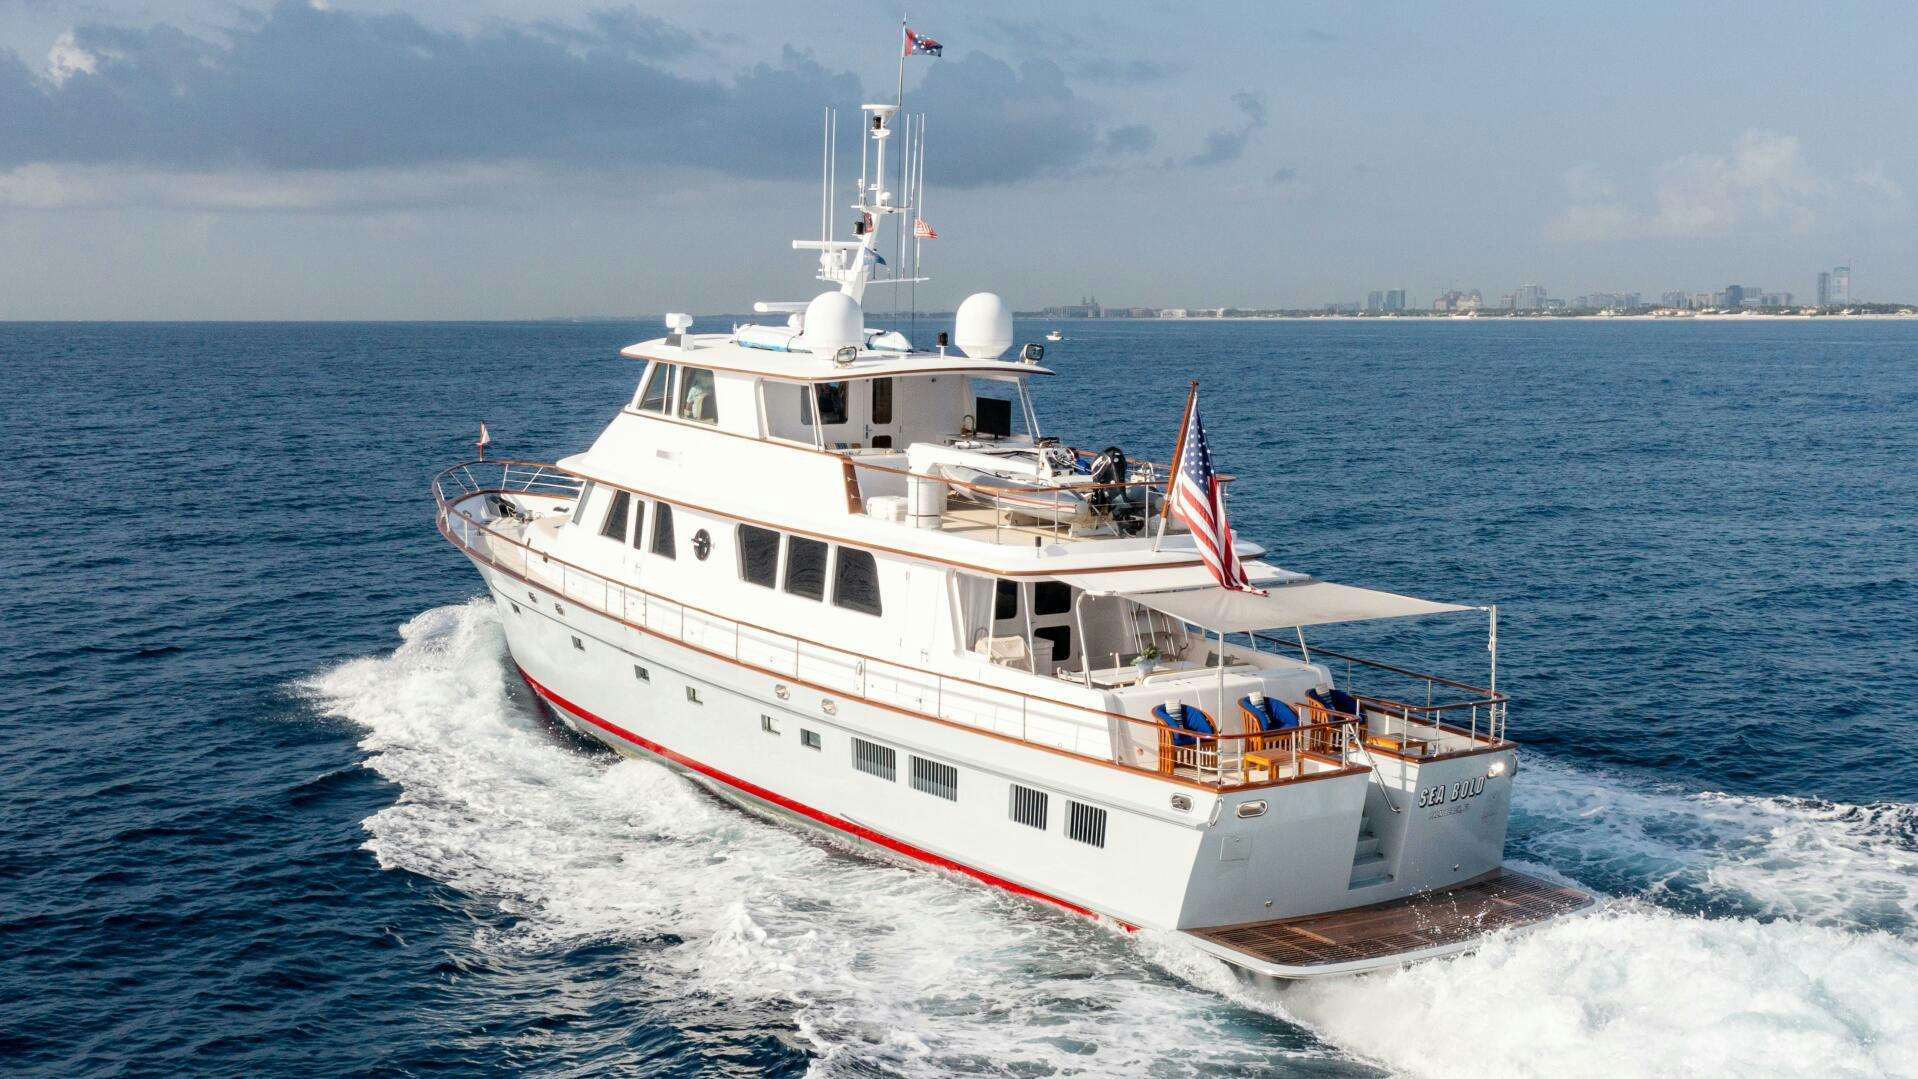 Sea bold
Yacht for Sale